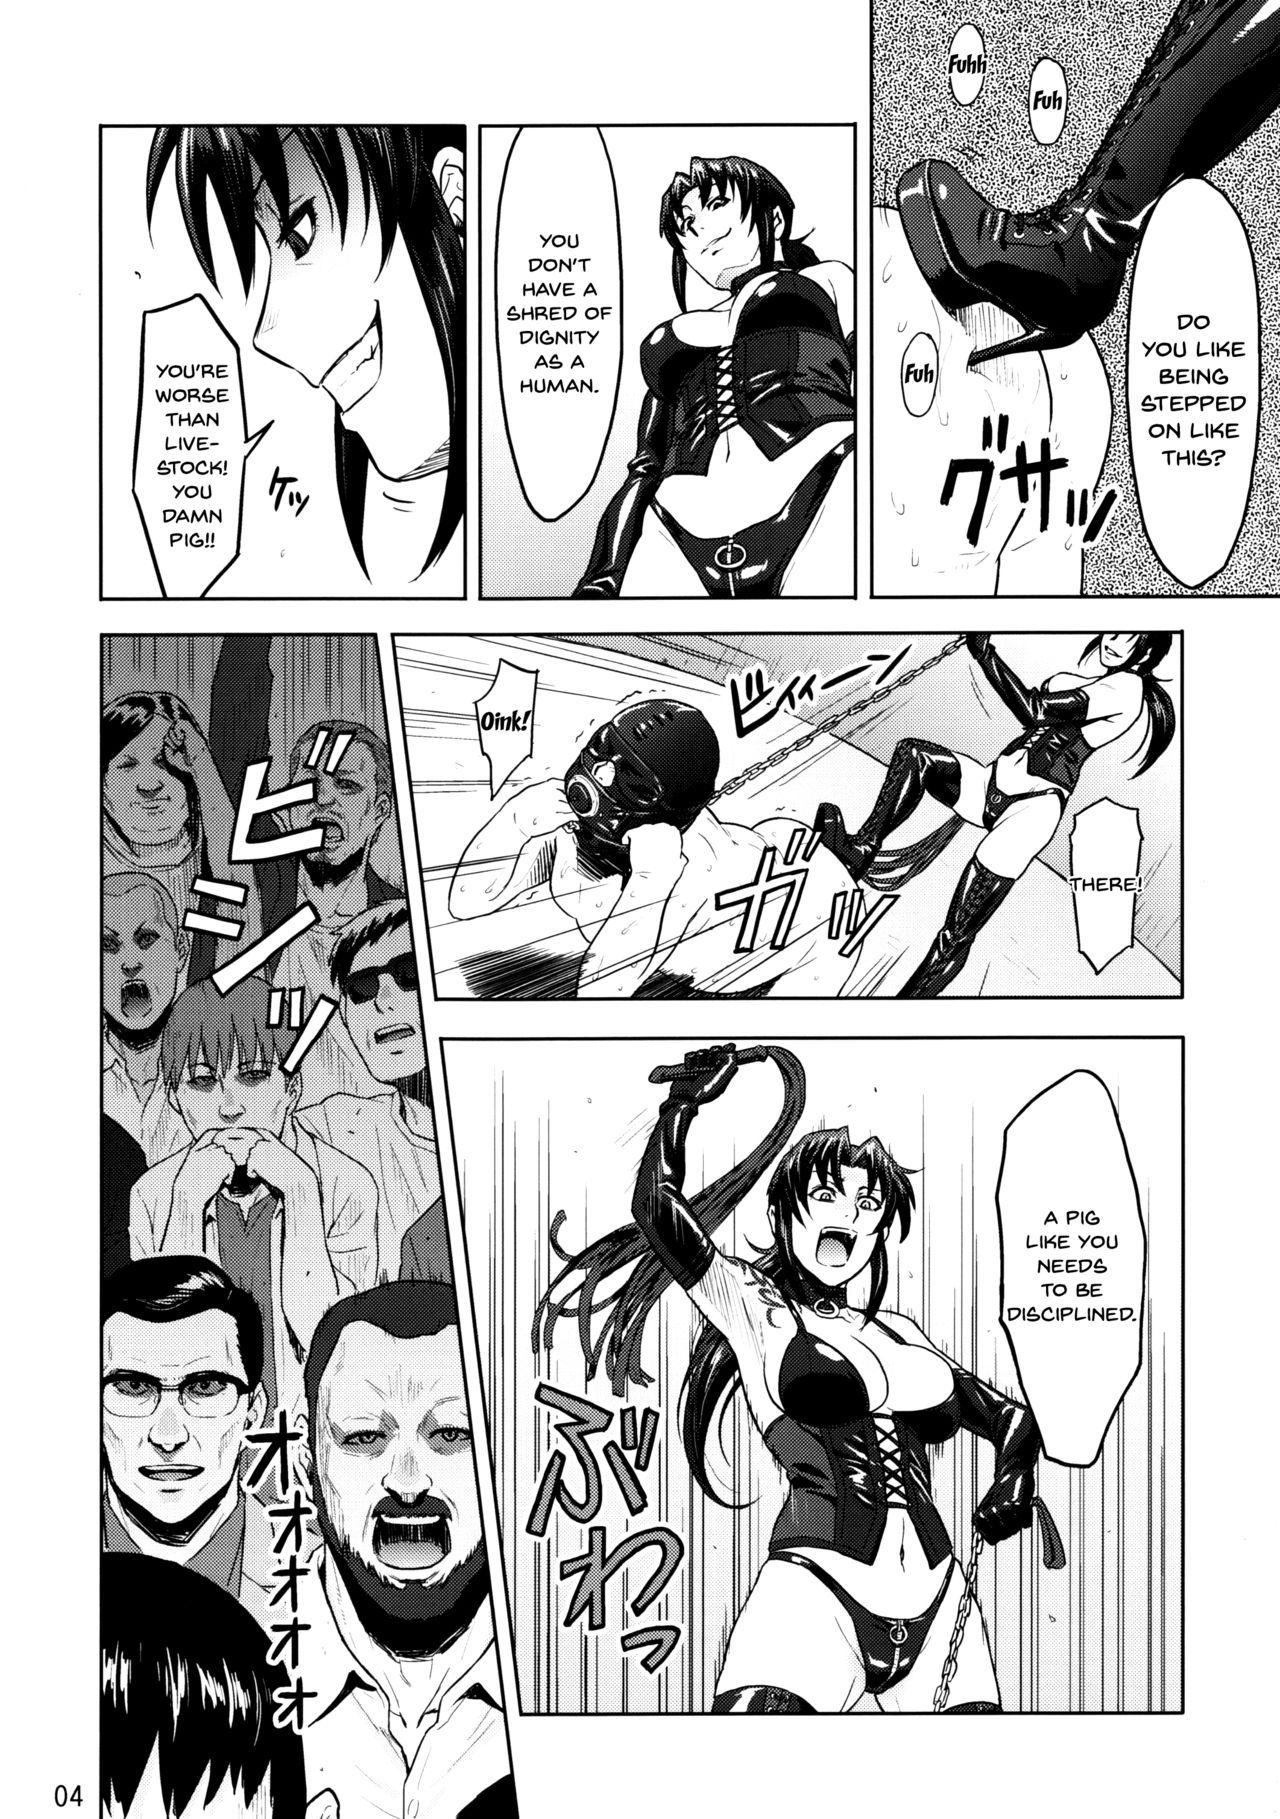 Tia My Sister Is A Pornstar Part 1 - Black lagoon Girl Gets Fucked - Page 10